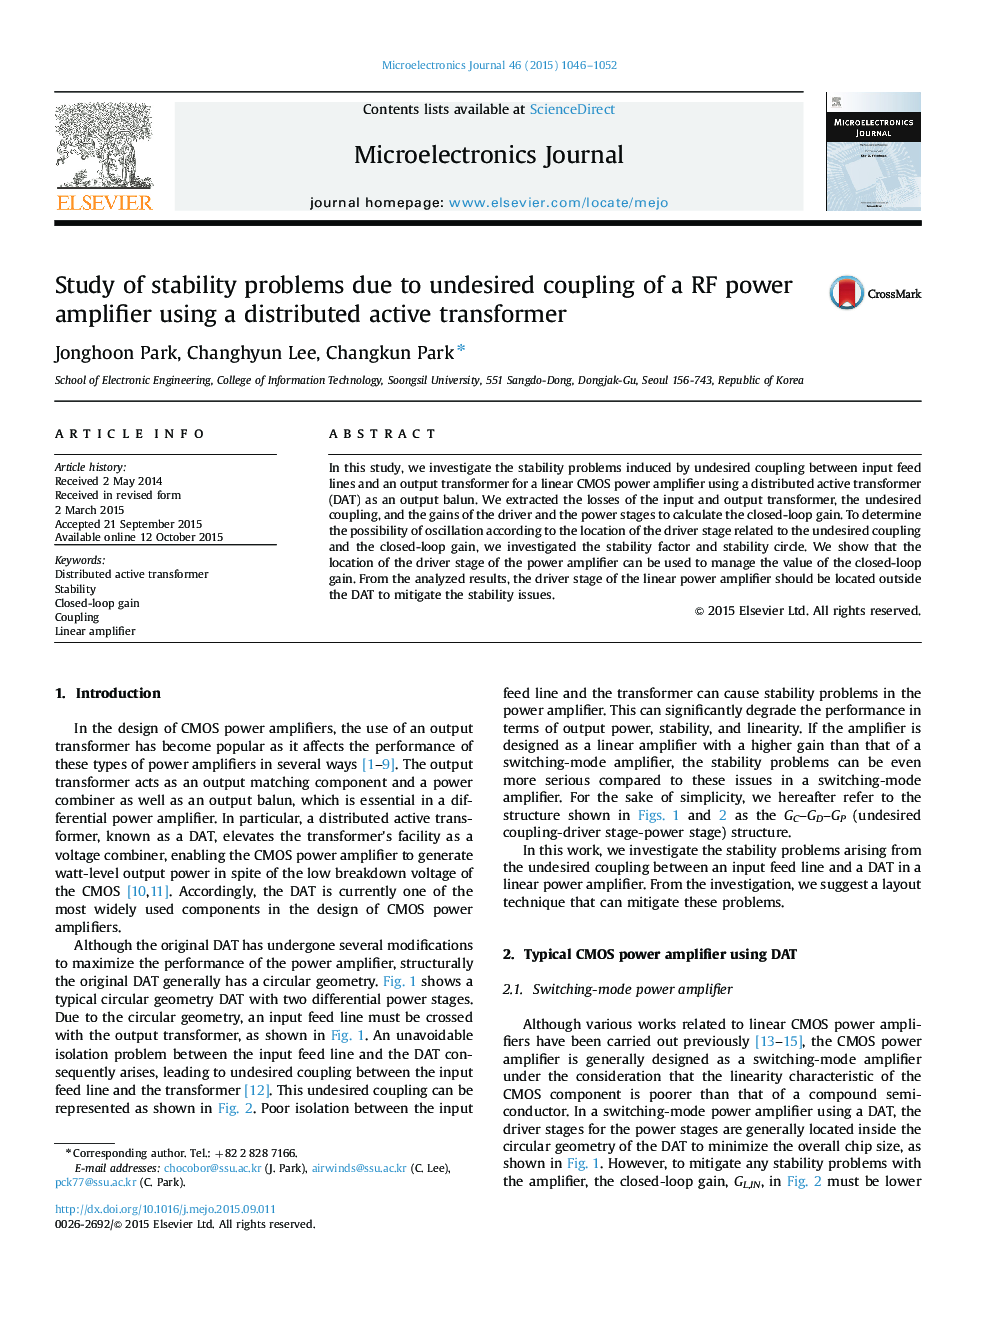 Study of stability problems due to undesired coupling of a RF power amplifier using a distributed active transformer